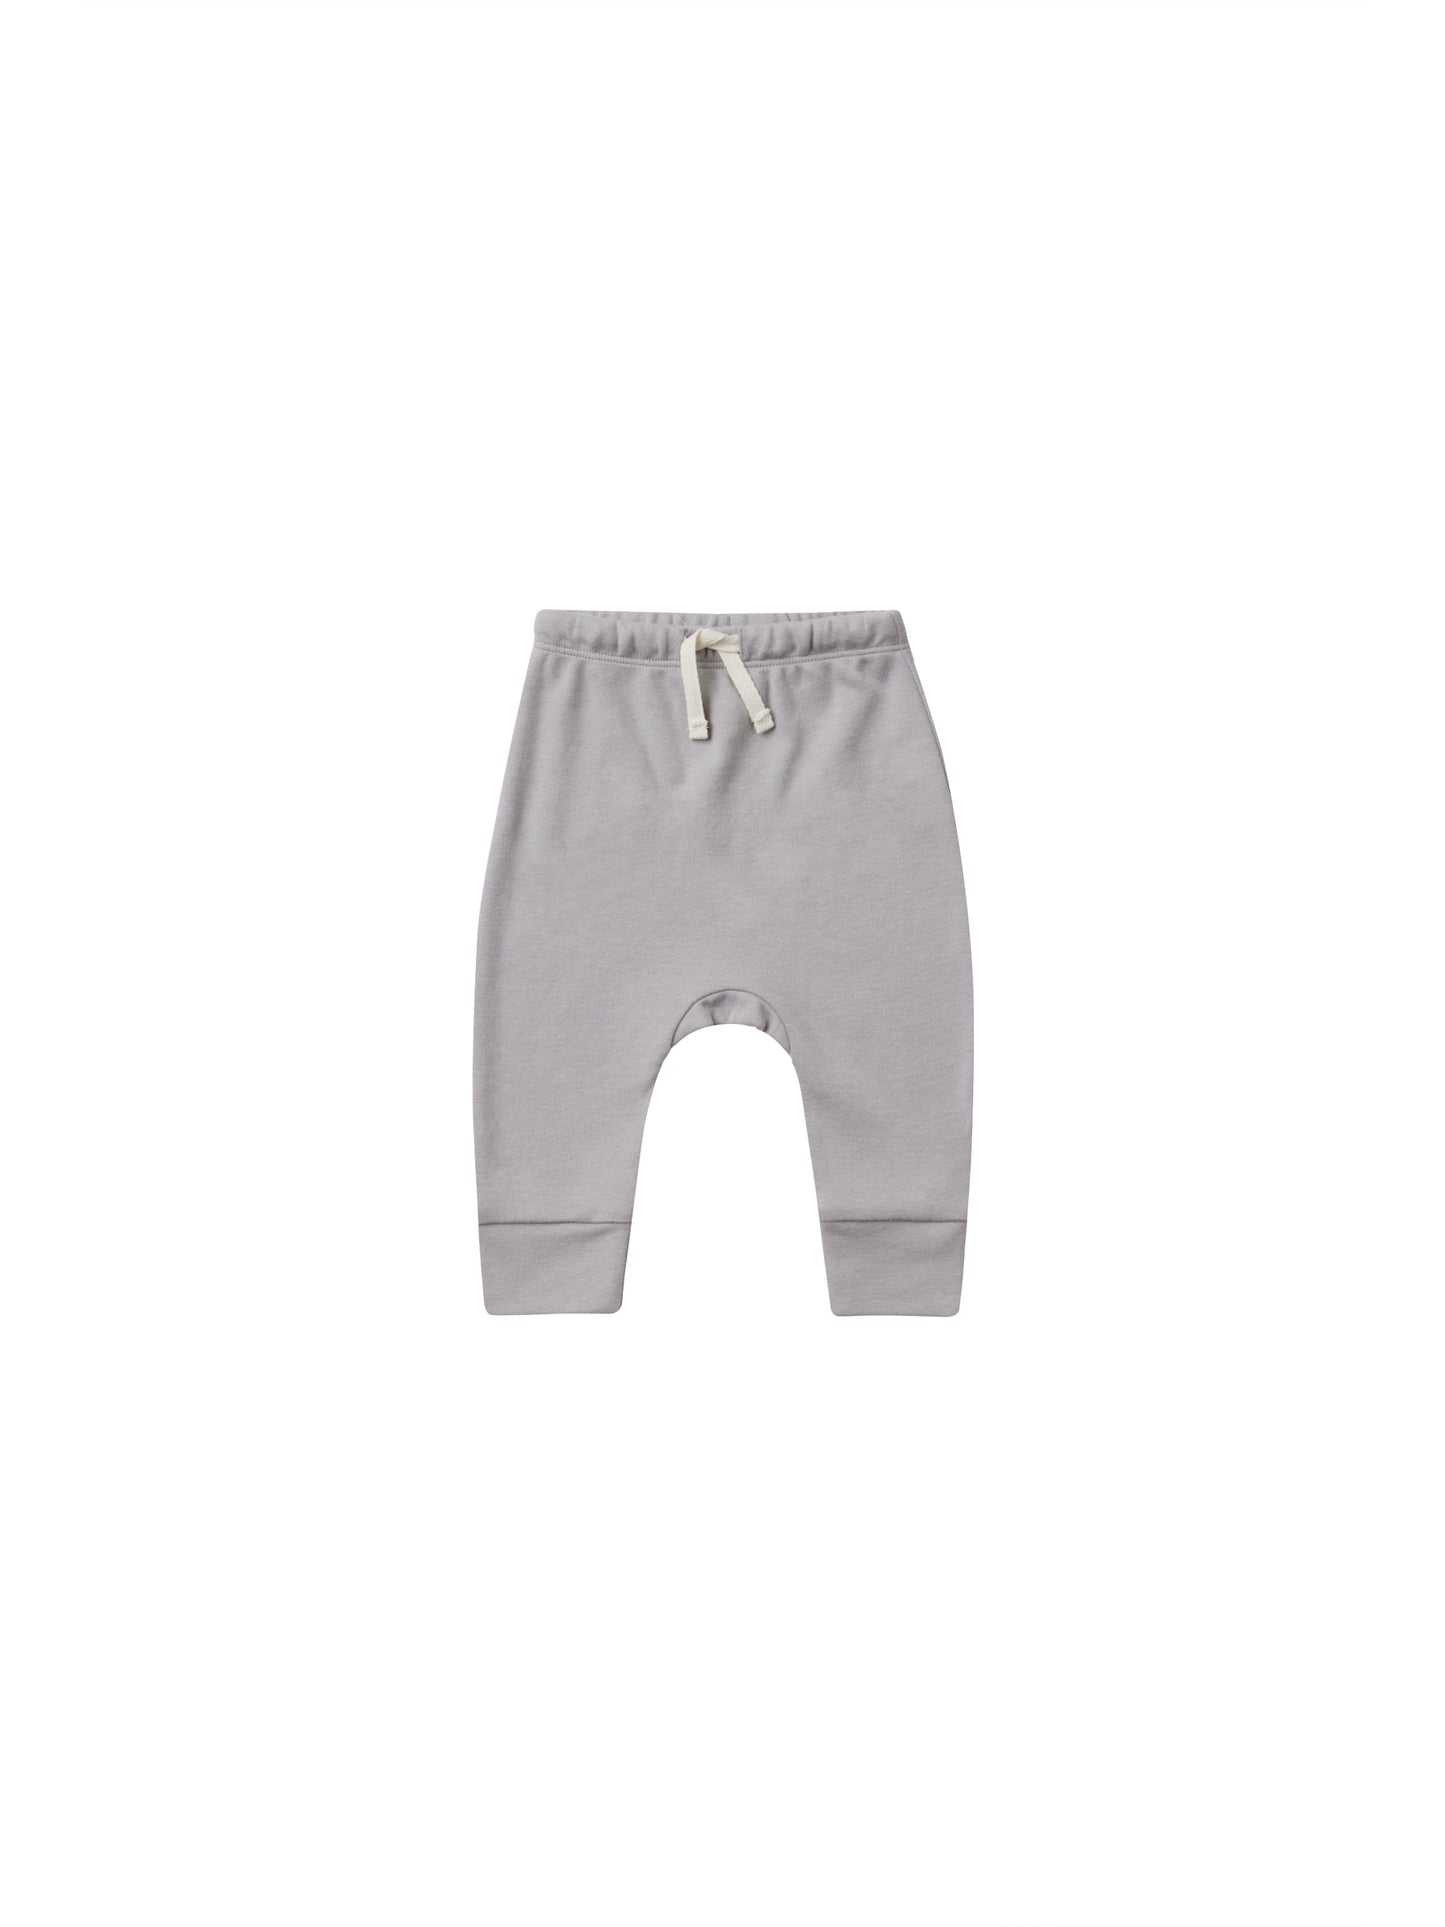 QUINCY MAE DRAWSTRING PANT - PERIWINKLE